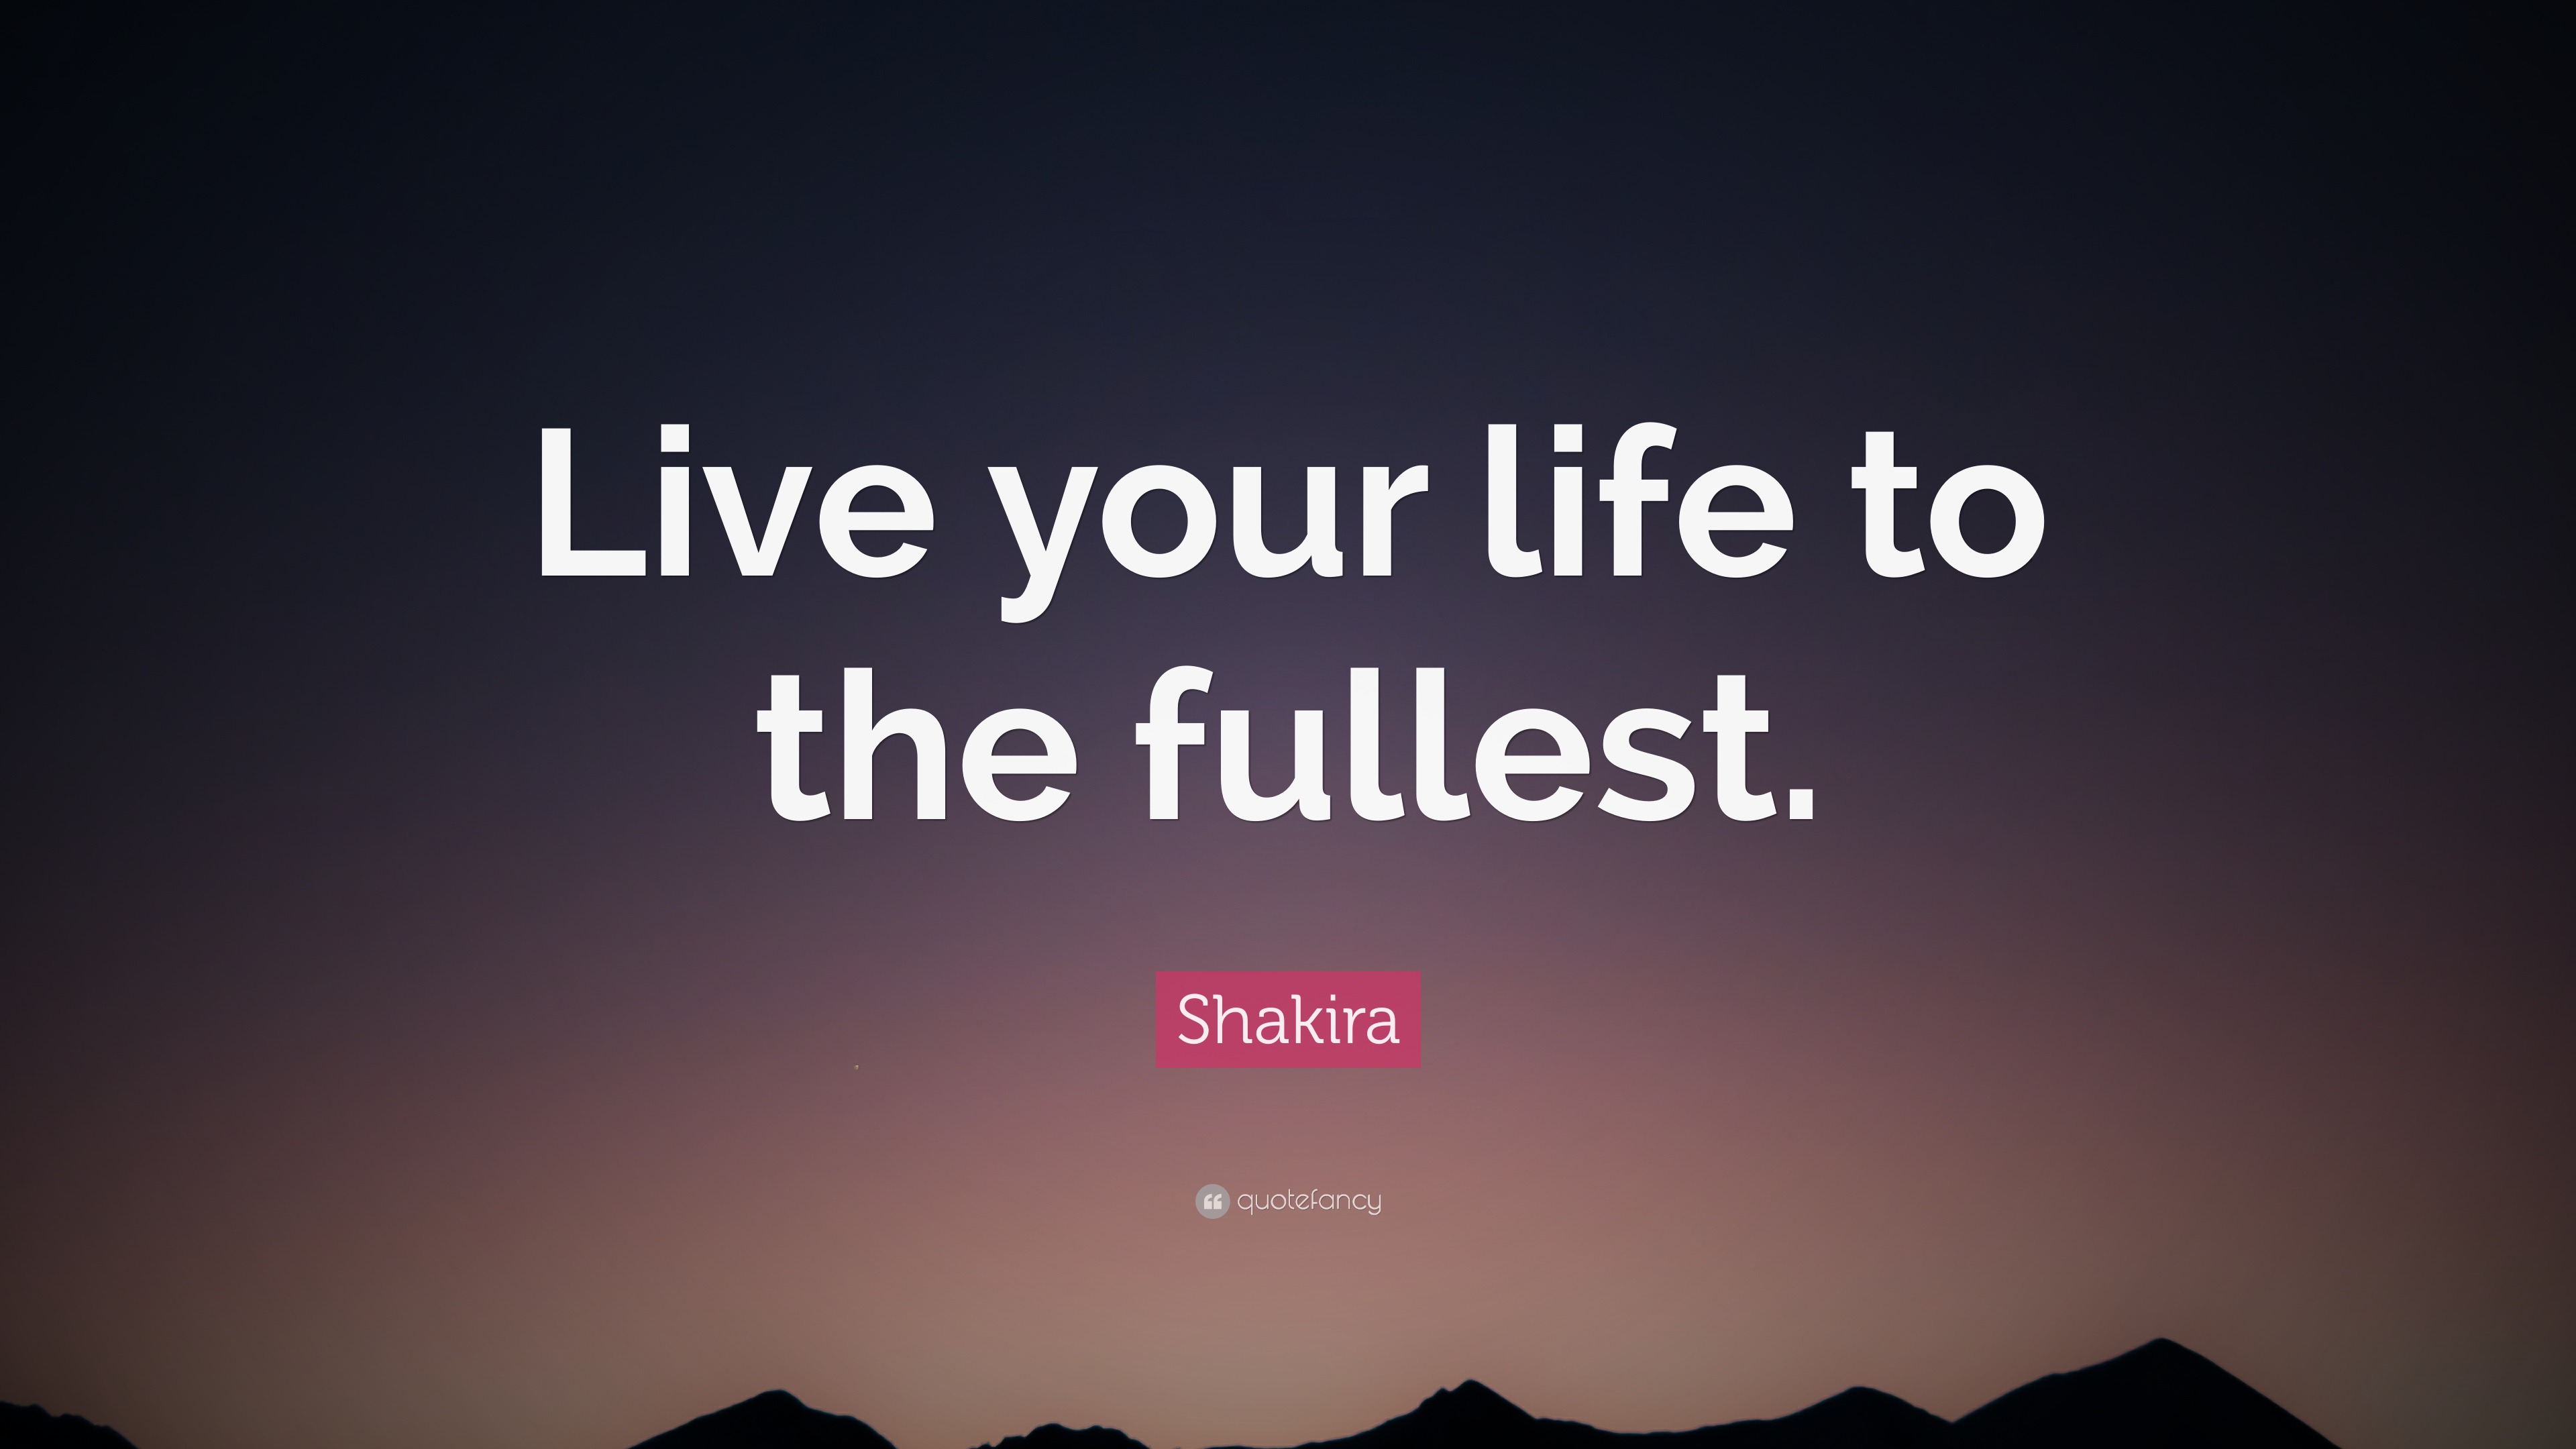 Shakira Quote: “Live your life to the fullest.”